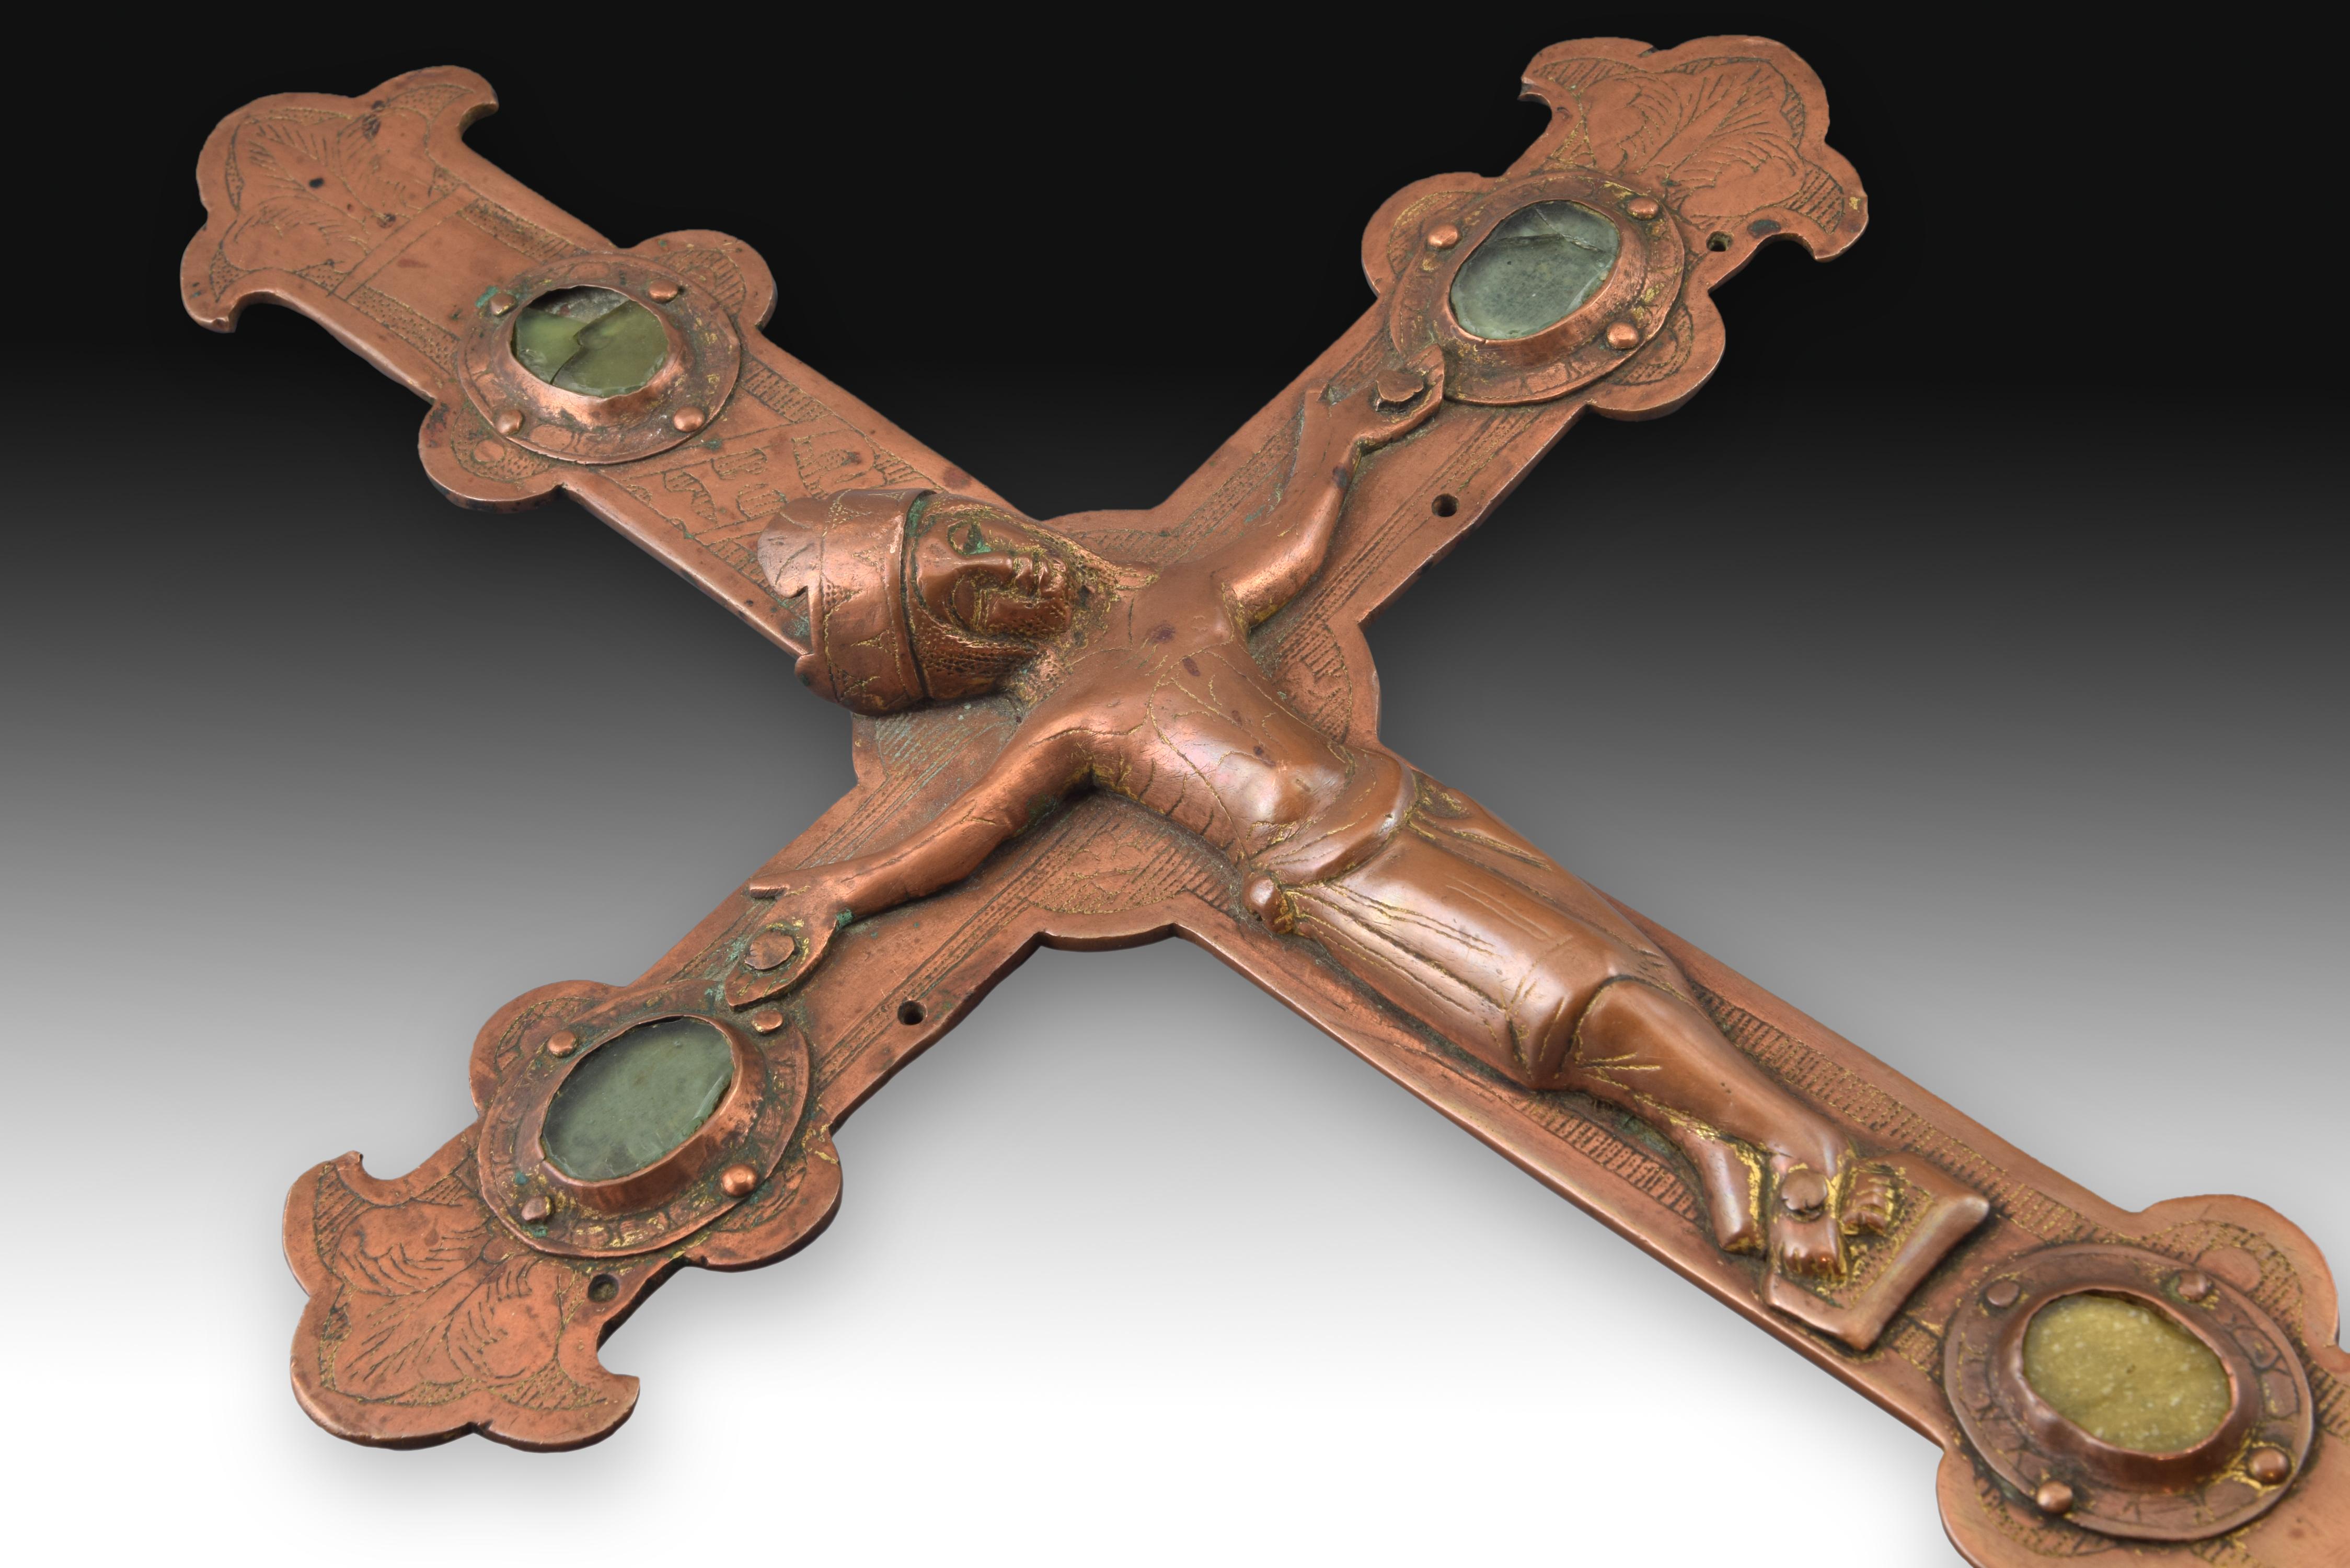 Gothic Processional Cross with Christ Copper, 14th Century